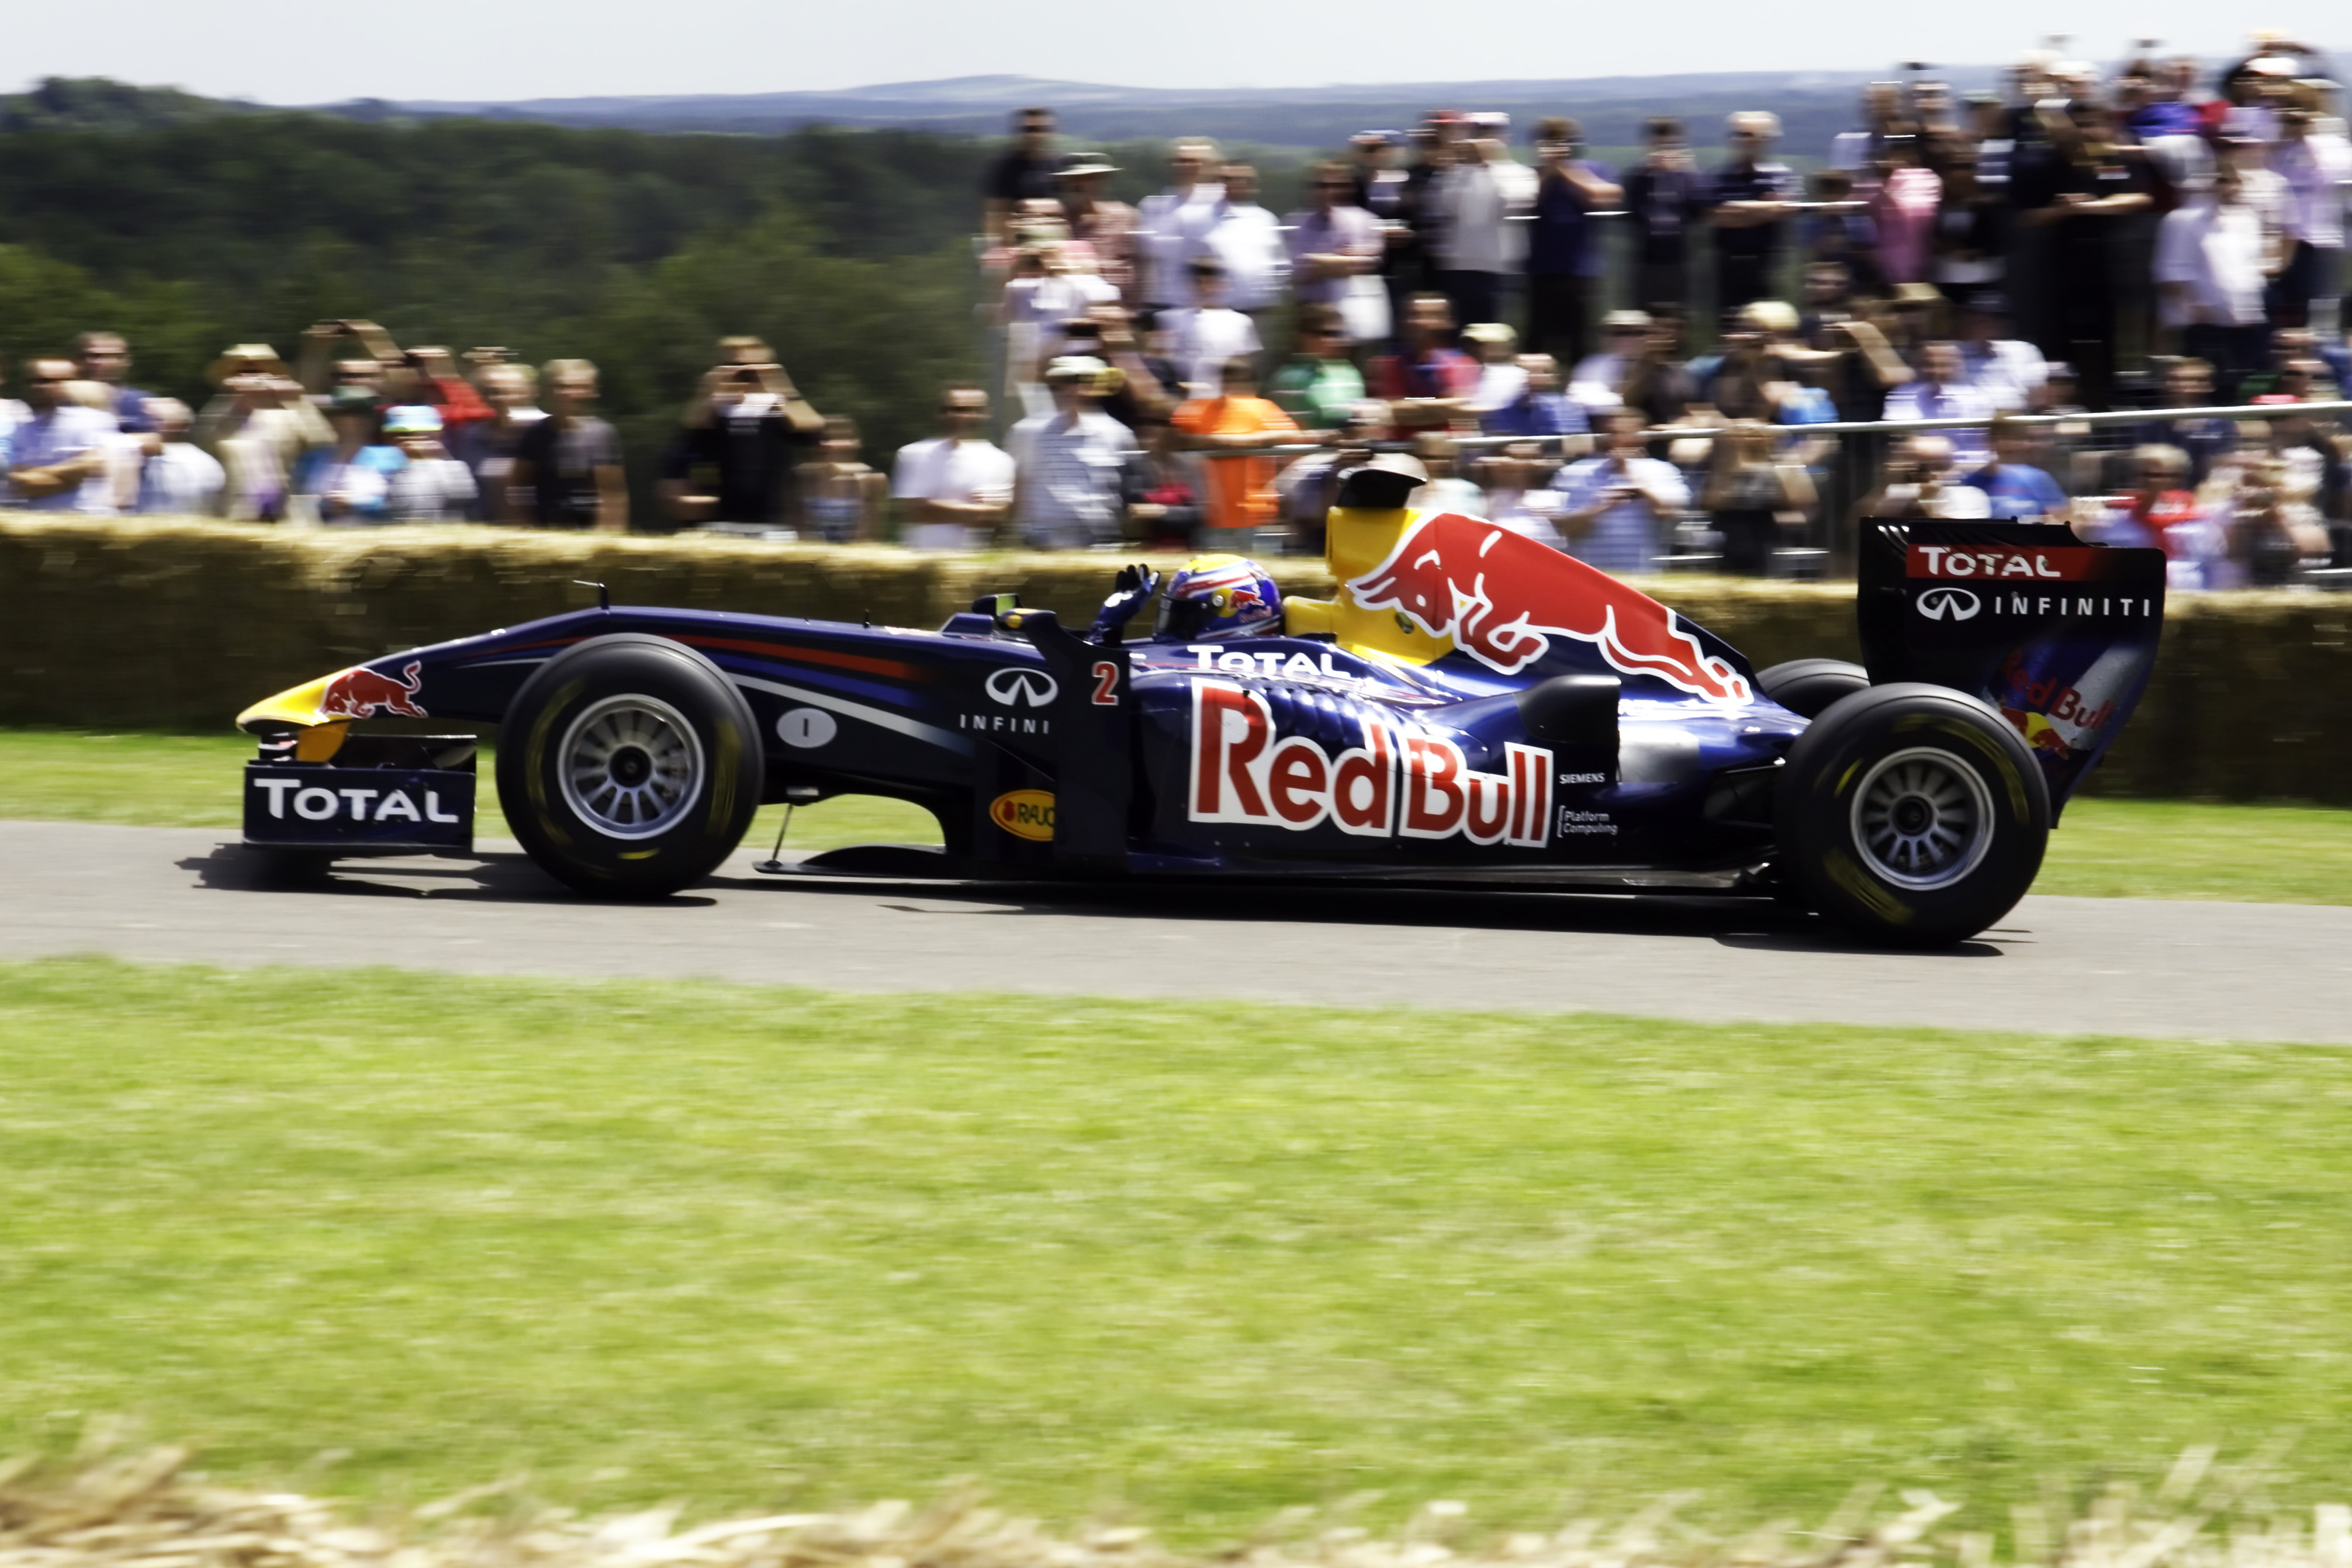 Fichier: Red Bull - Cosworth RB1 - Flickr - andrewbasterfield.jpg...